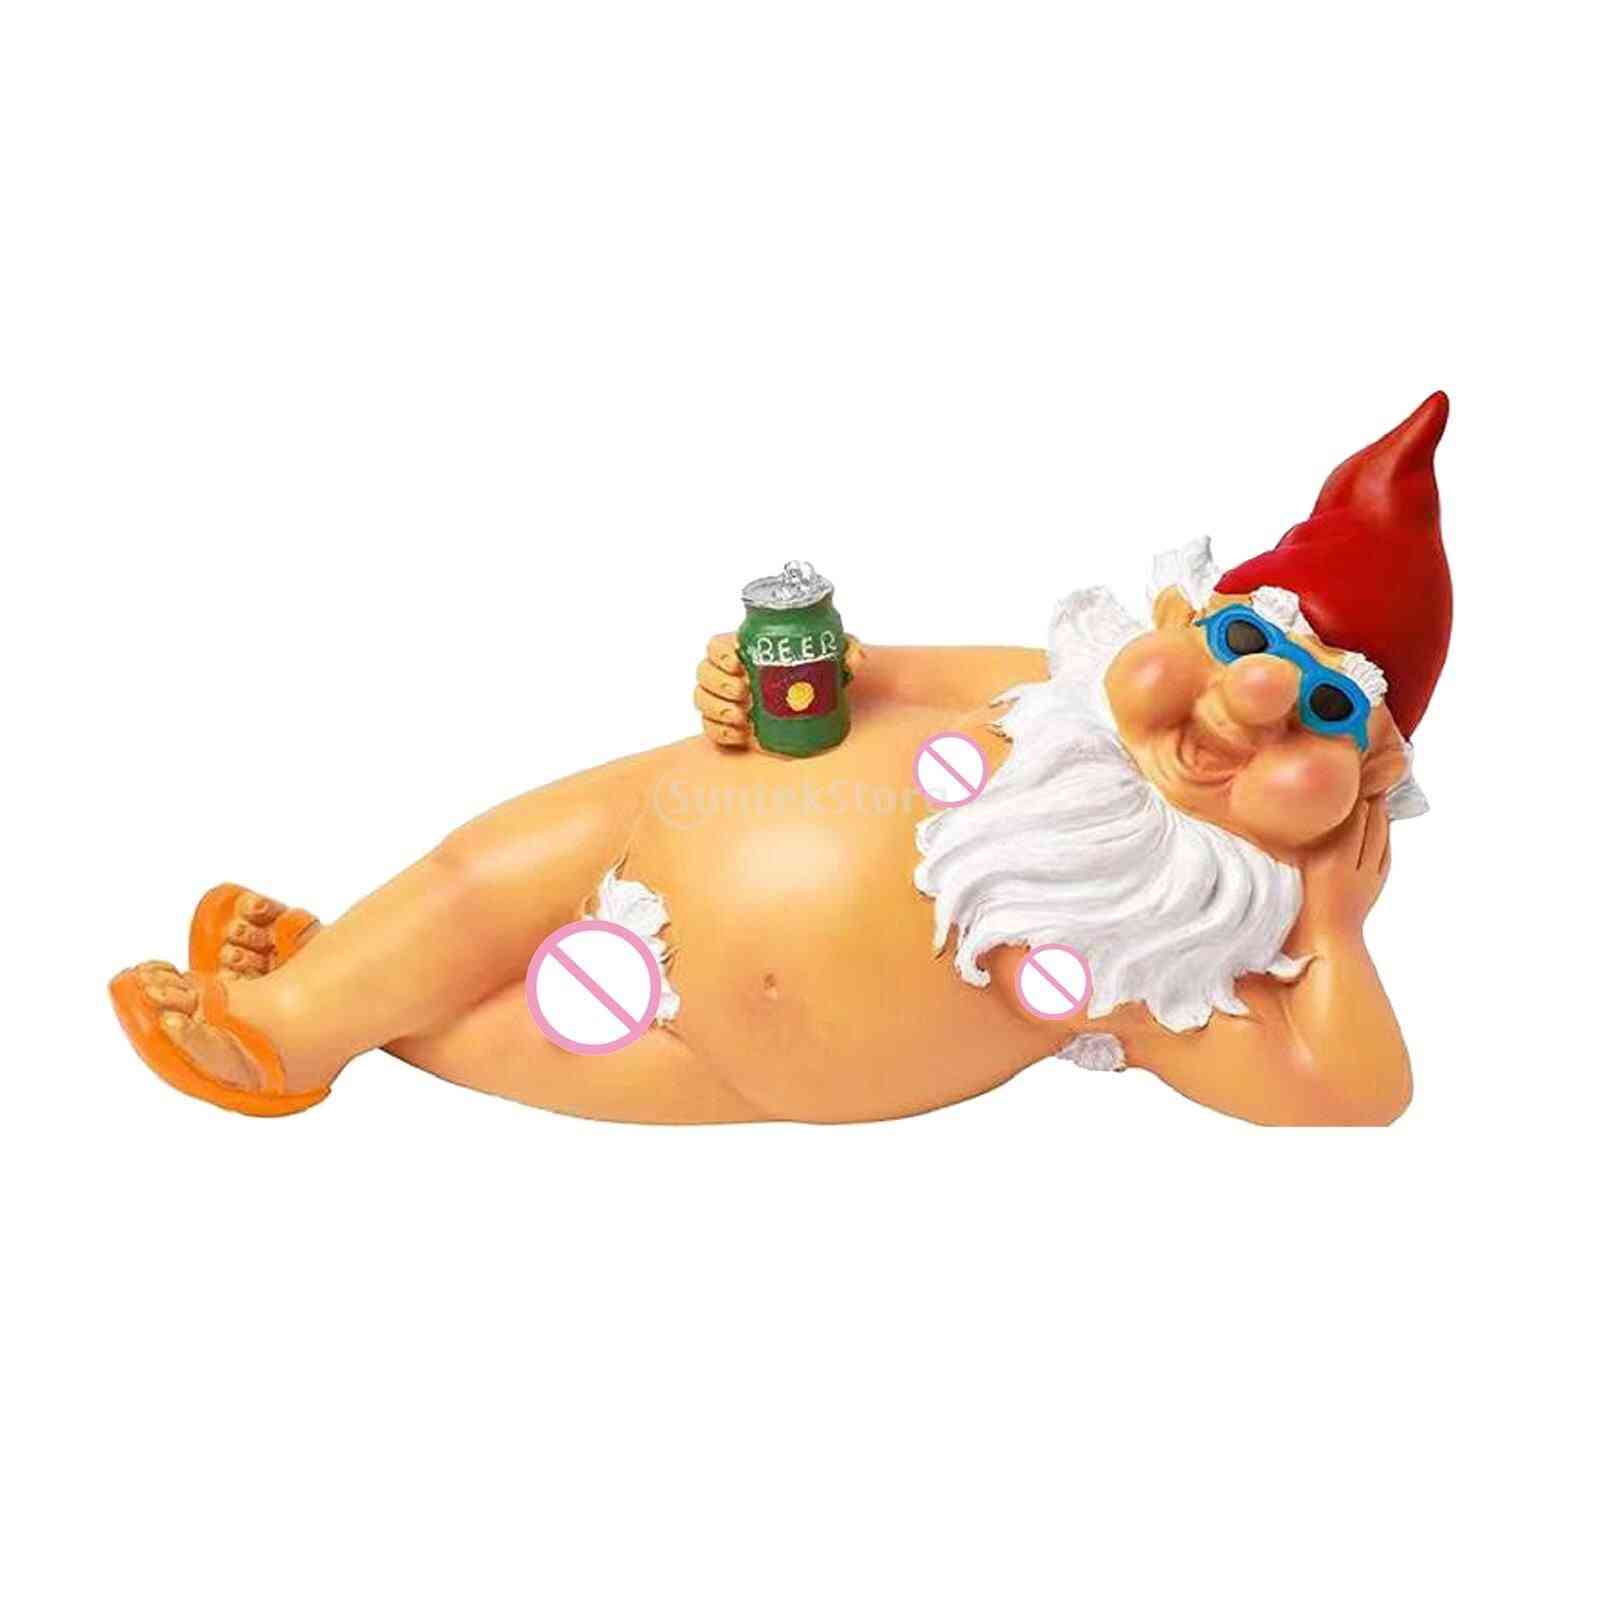 Naughty Garden Naked Gnome Statue